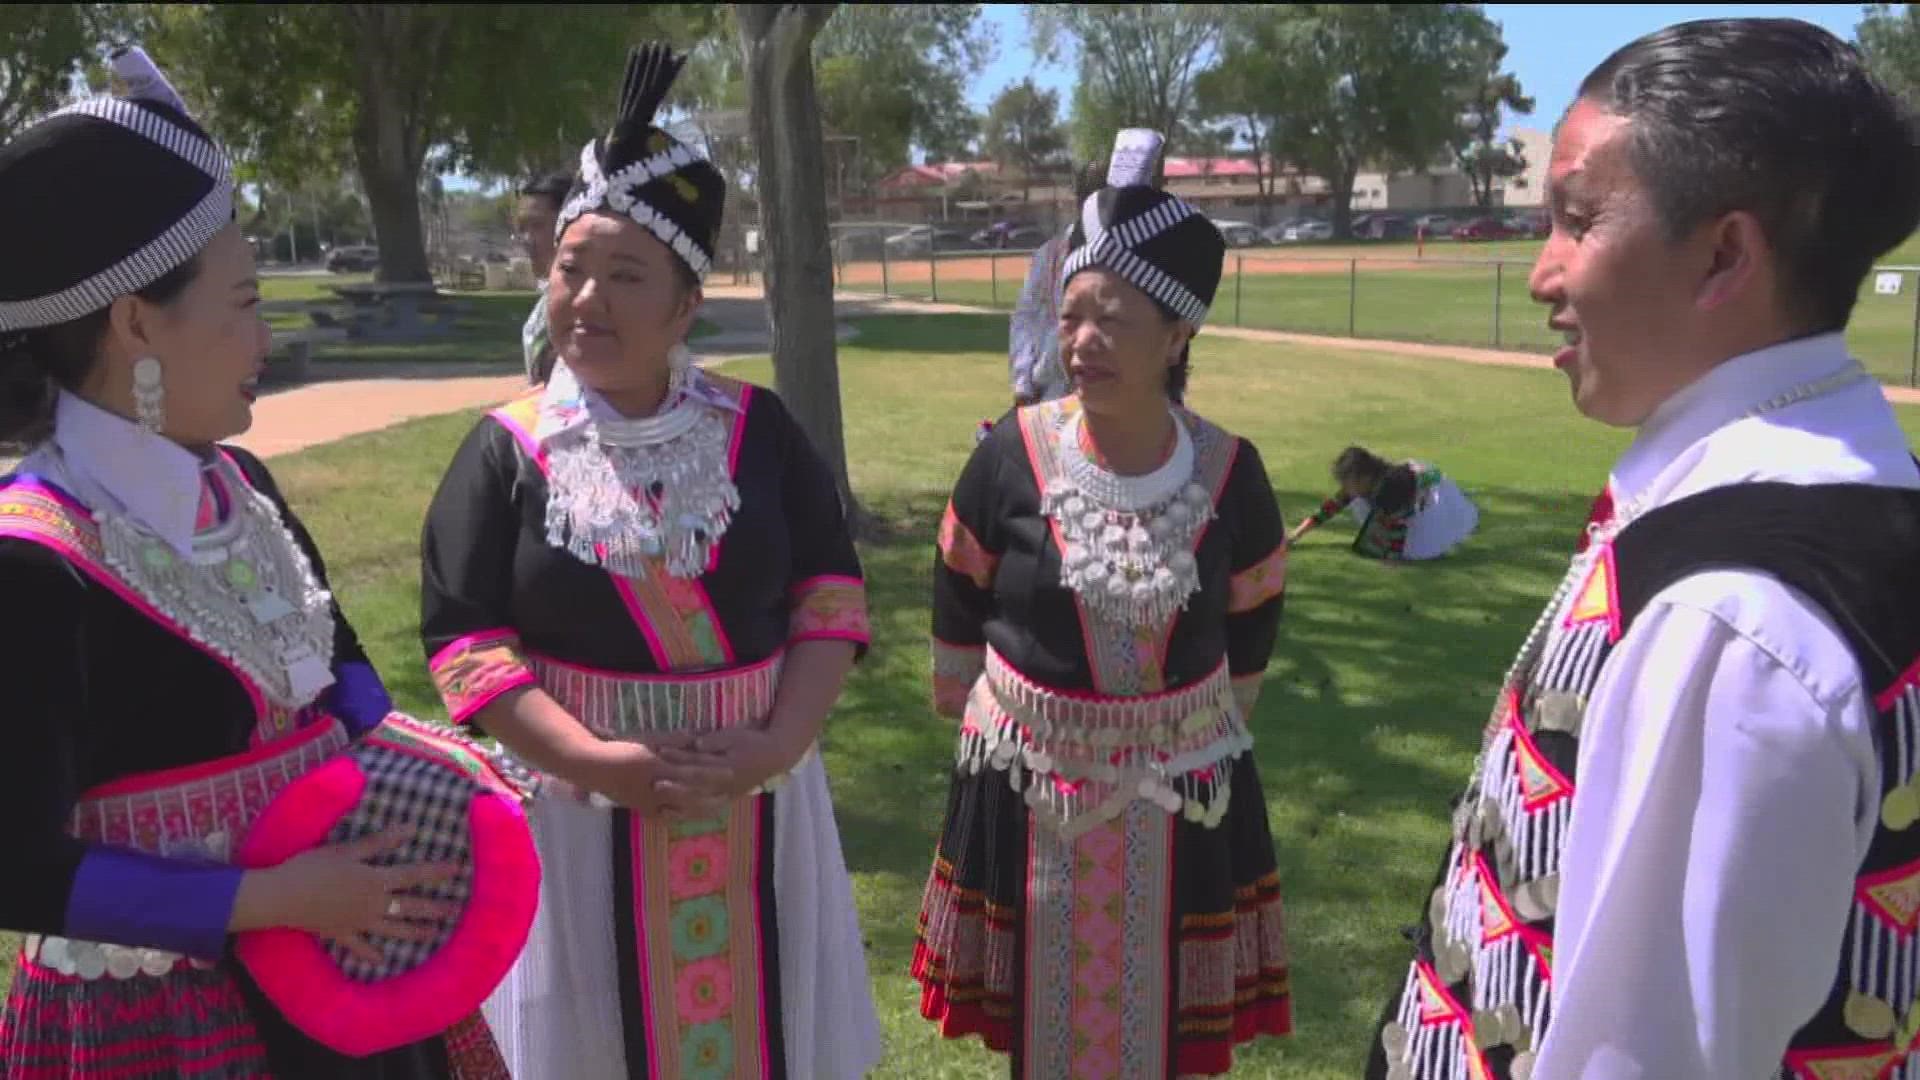 During the late 1970s and early 1980s, about 5,000 Hmong made their way from southeast Asia here to San Diego to start a new life.